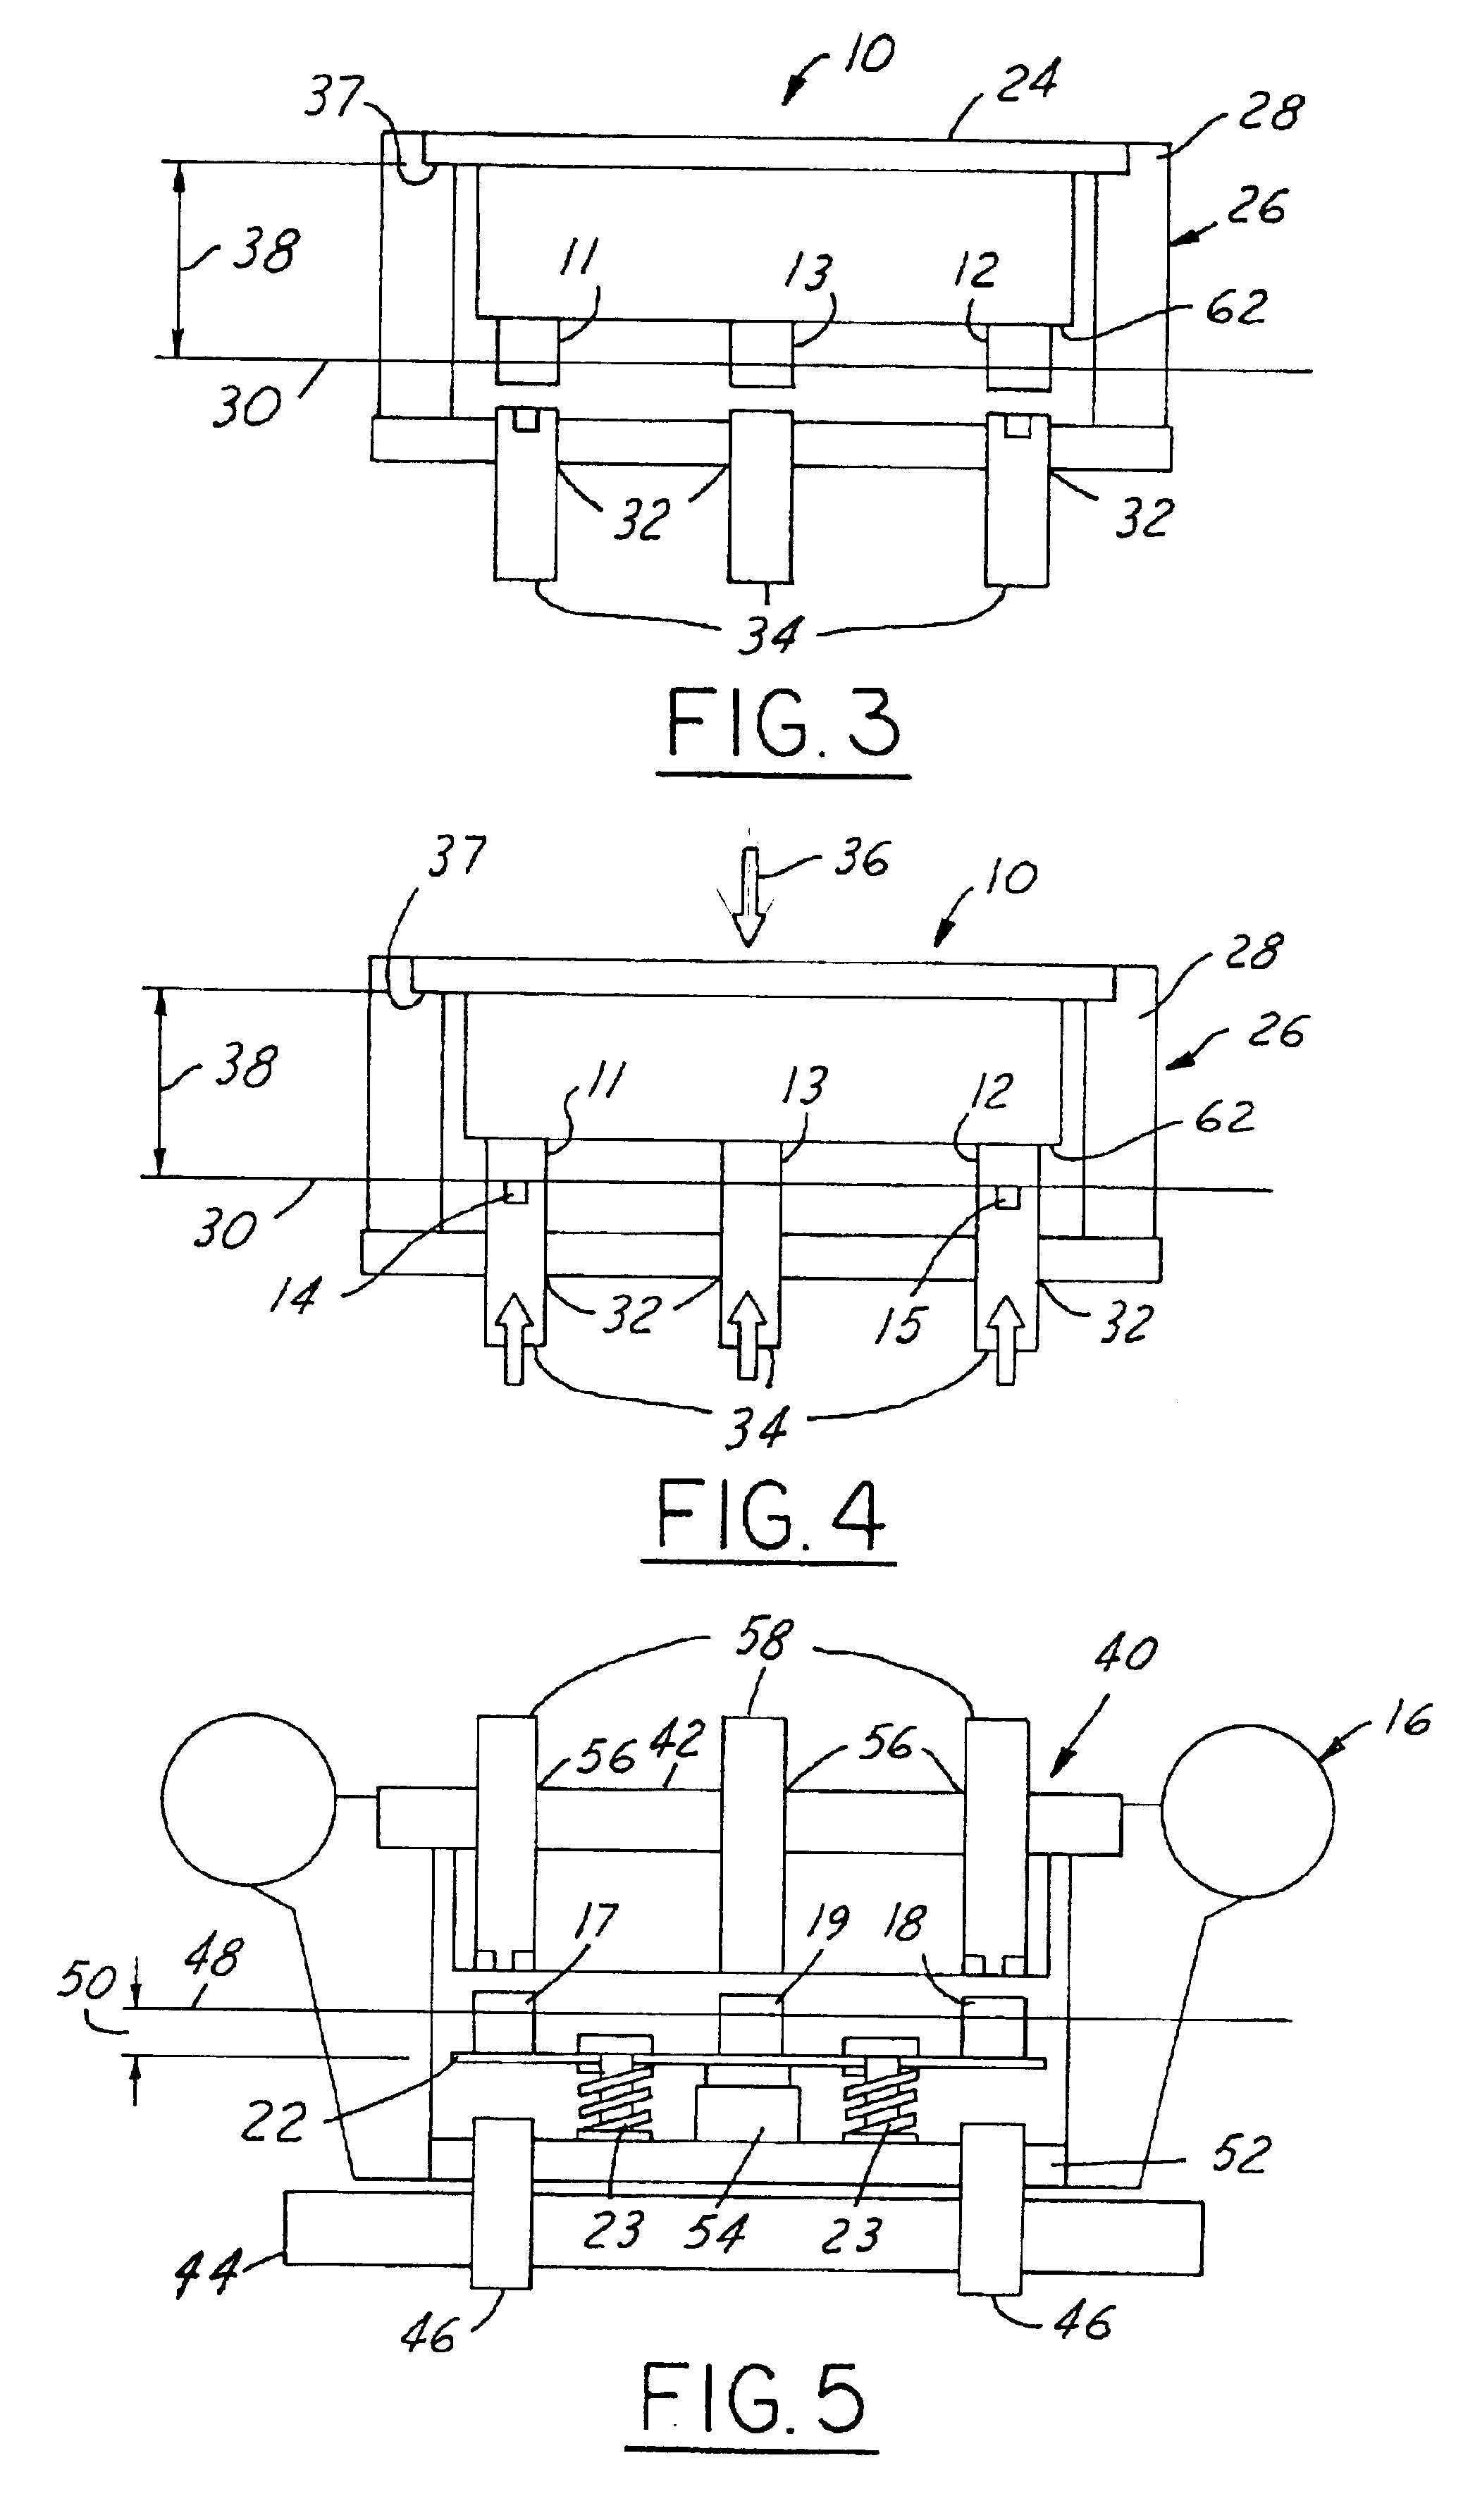 Method of preparing air bag module and vehicle support for final process positioning